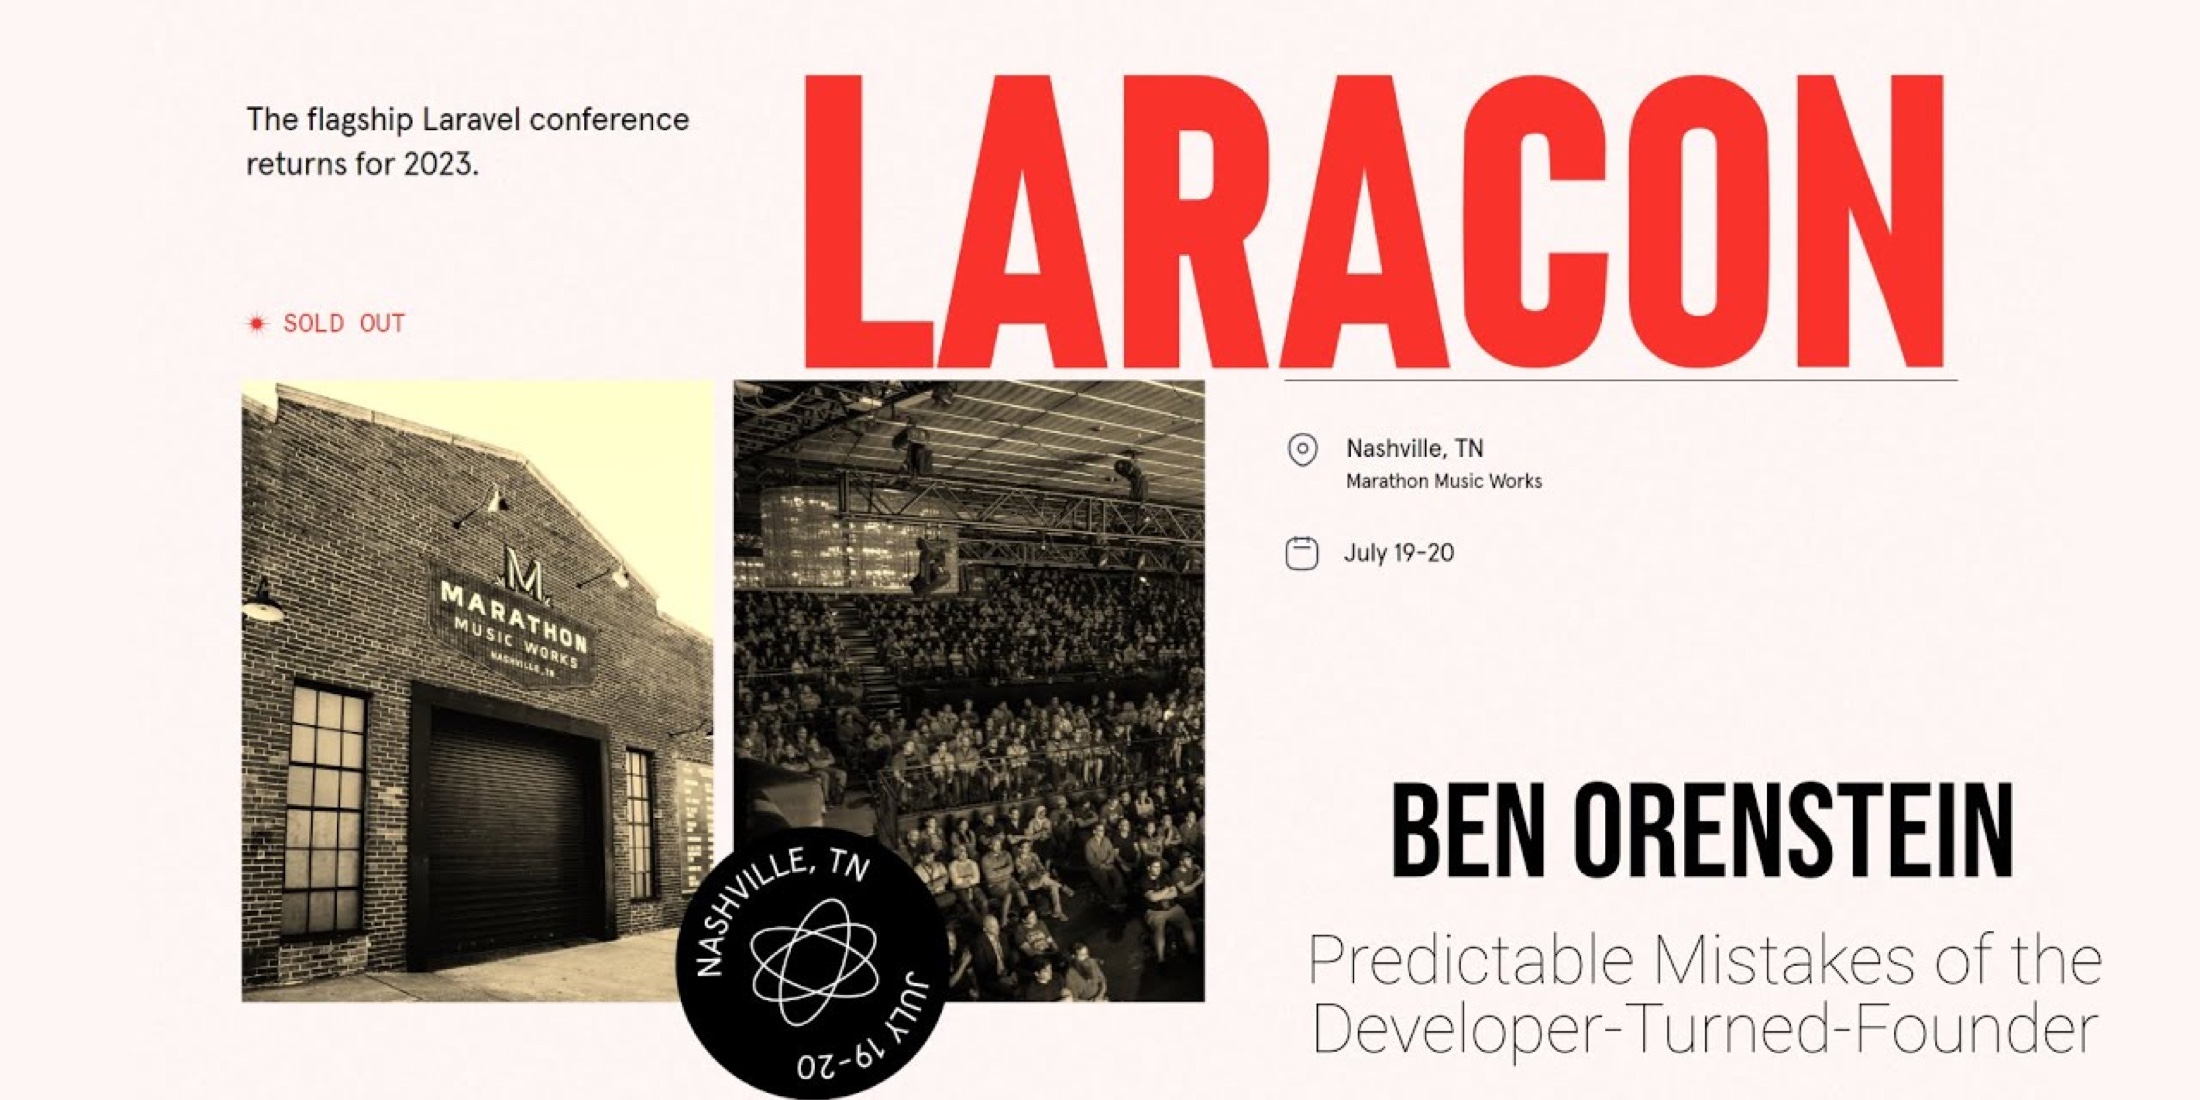 Watch Ben Orenstein's "Predictable Mistakes of the Developer-Turned-Founder" talk from Laracon image